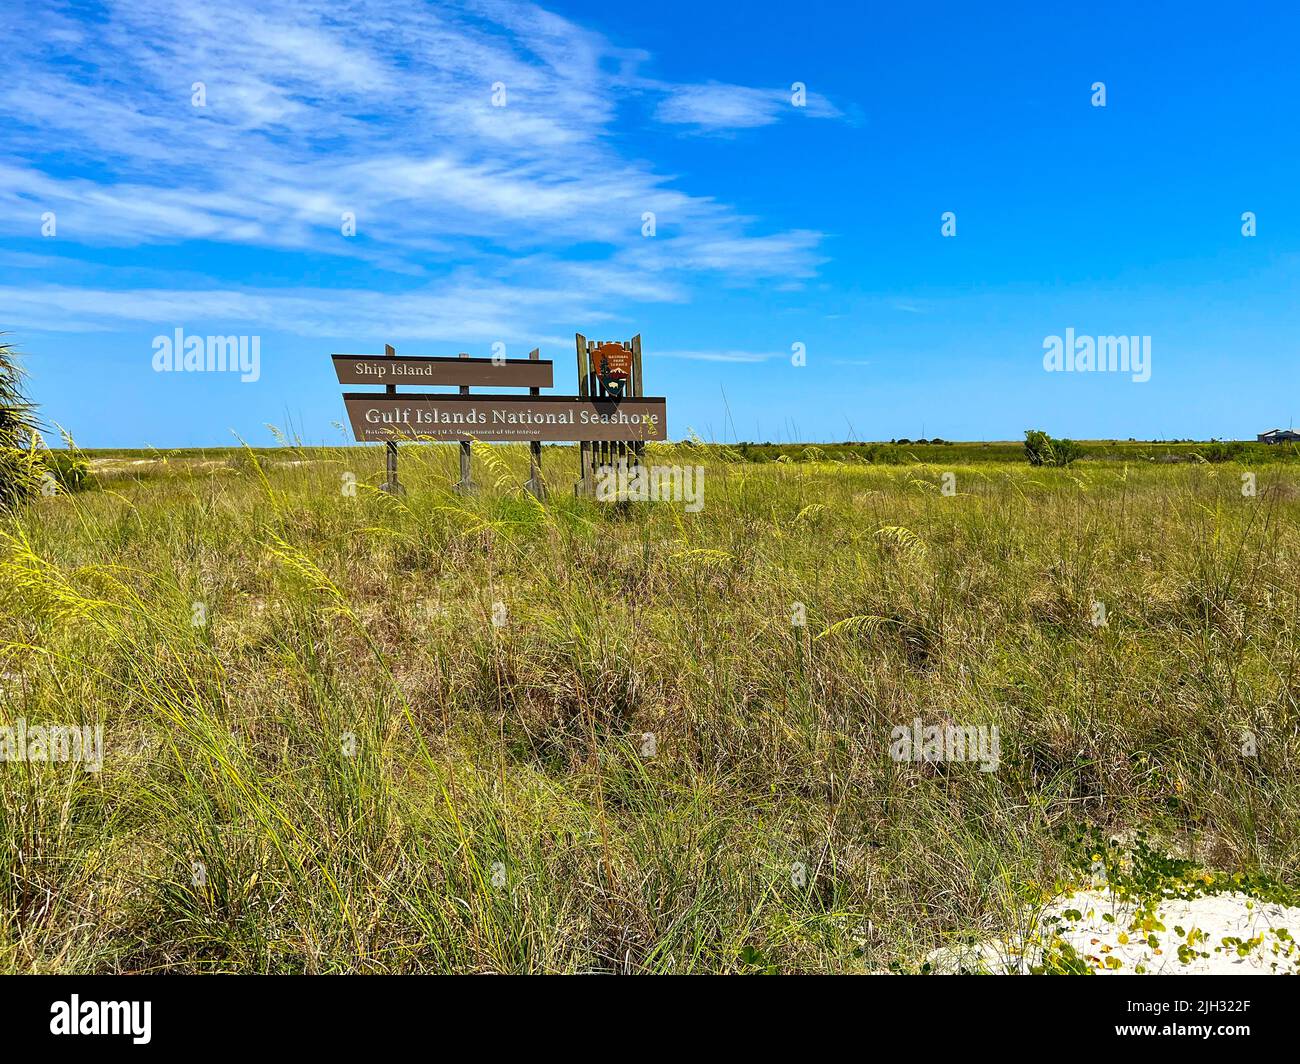 Ship Island, MS - June 17, 2022: Ship Island is part of the Gulf Islands National Seashore, a part of the National Park Service Stock Photo